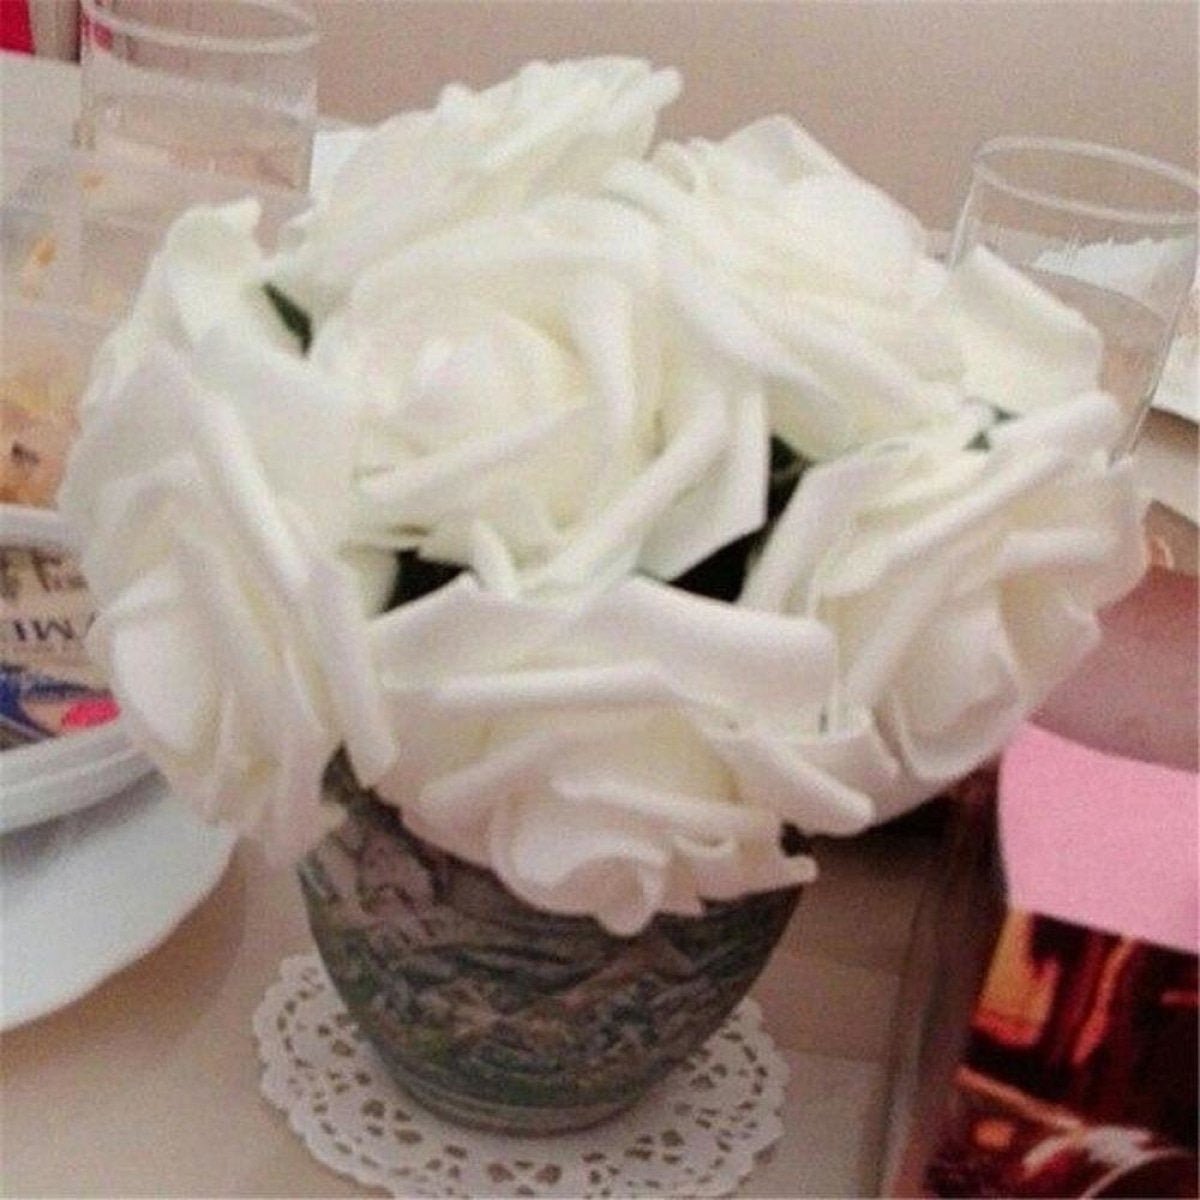 20pcs 7cm Artificial Flowers with Stems Foam Rose Fake Bride Bouquet Wedding - White - - Asia Sell